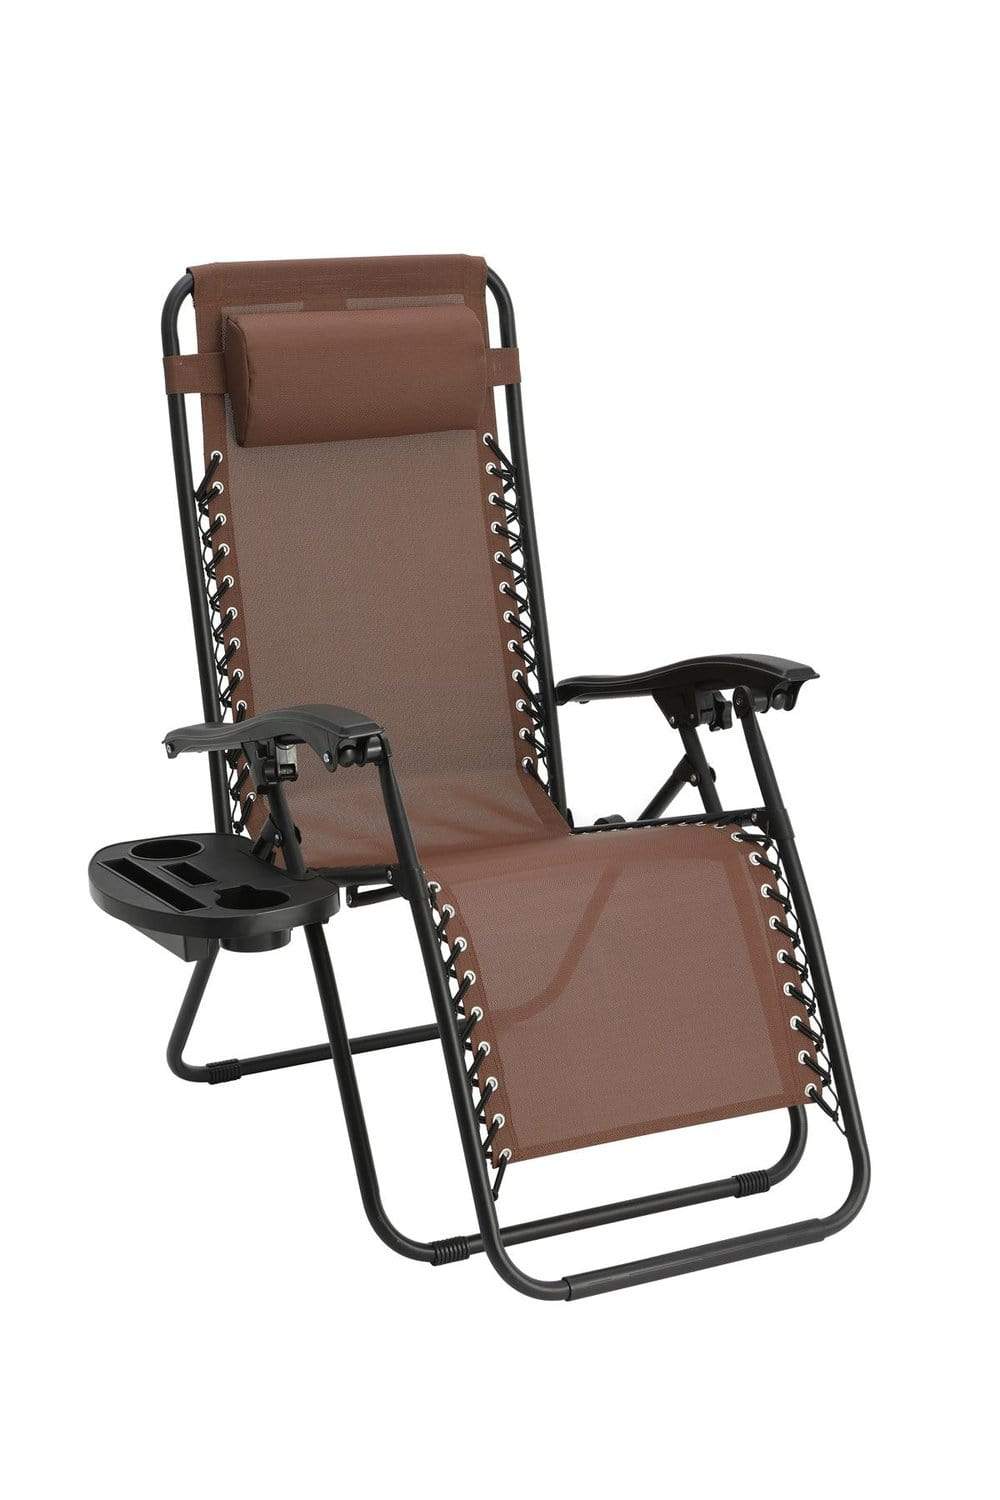 Zero Gravity Chair Foldable Reclining Outdoors Garden -2Pc Brown TapClickBuy